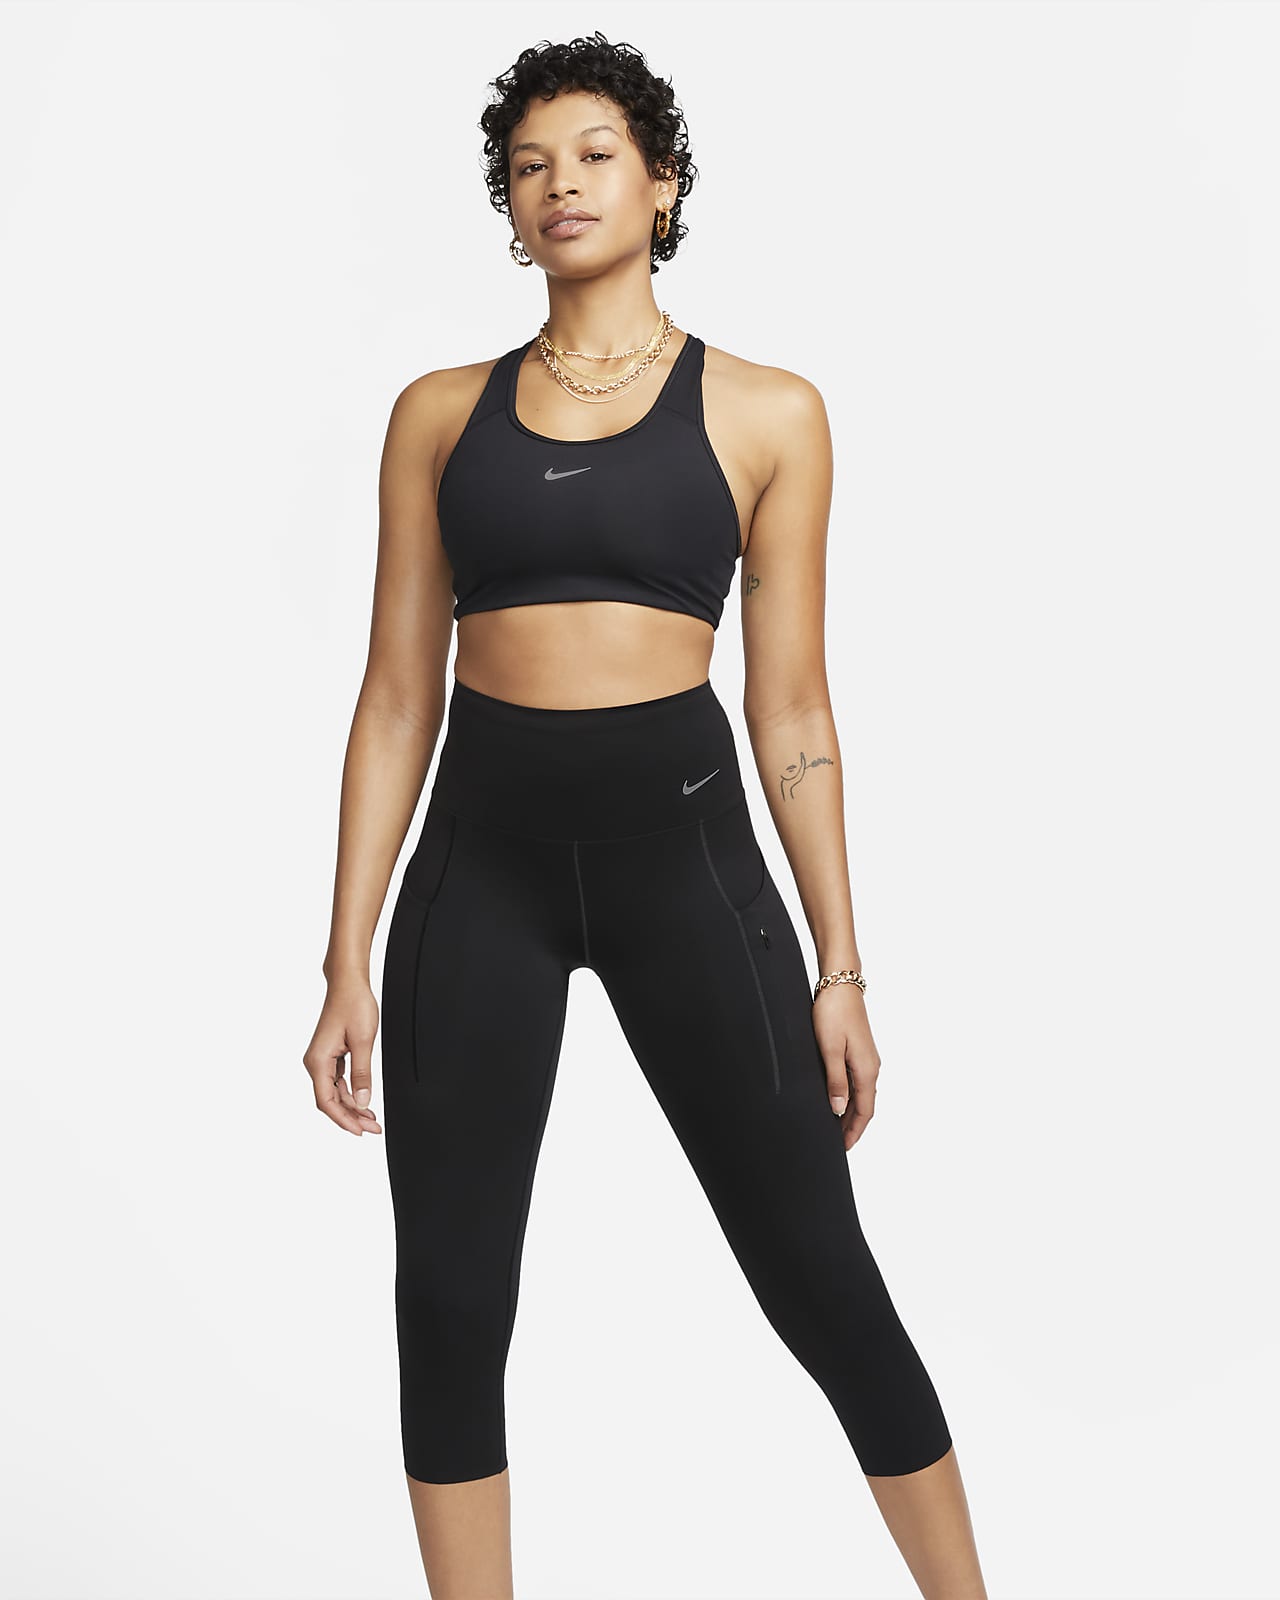 Nike Women's Epic Luxe Running Leggings with Pockets in Black